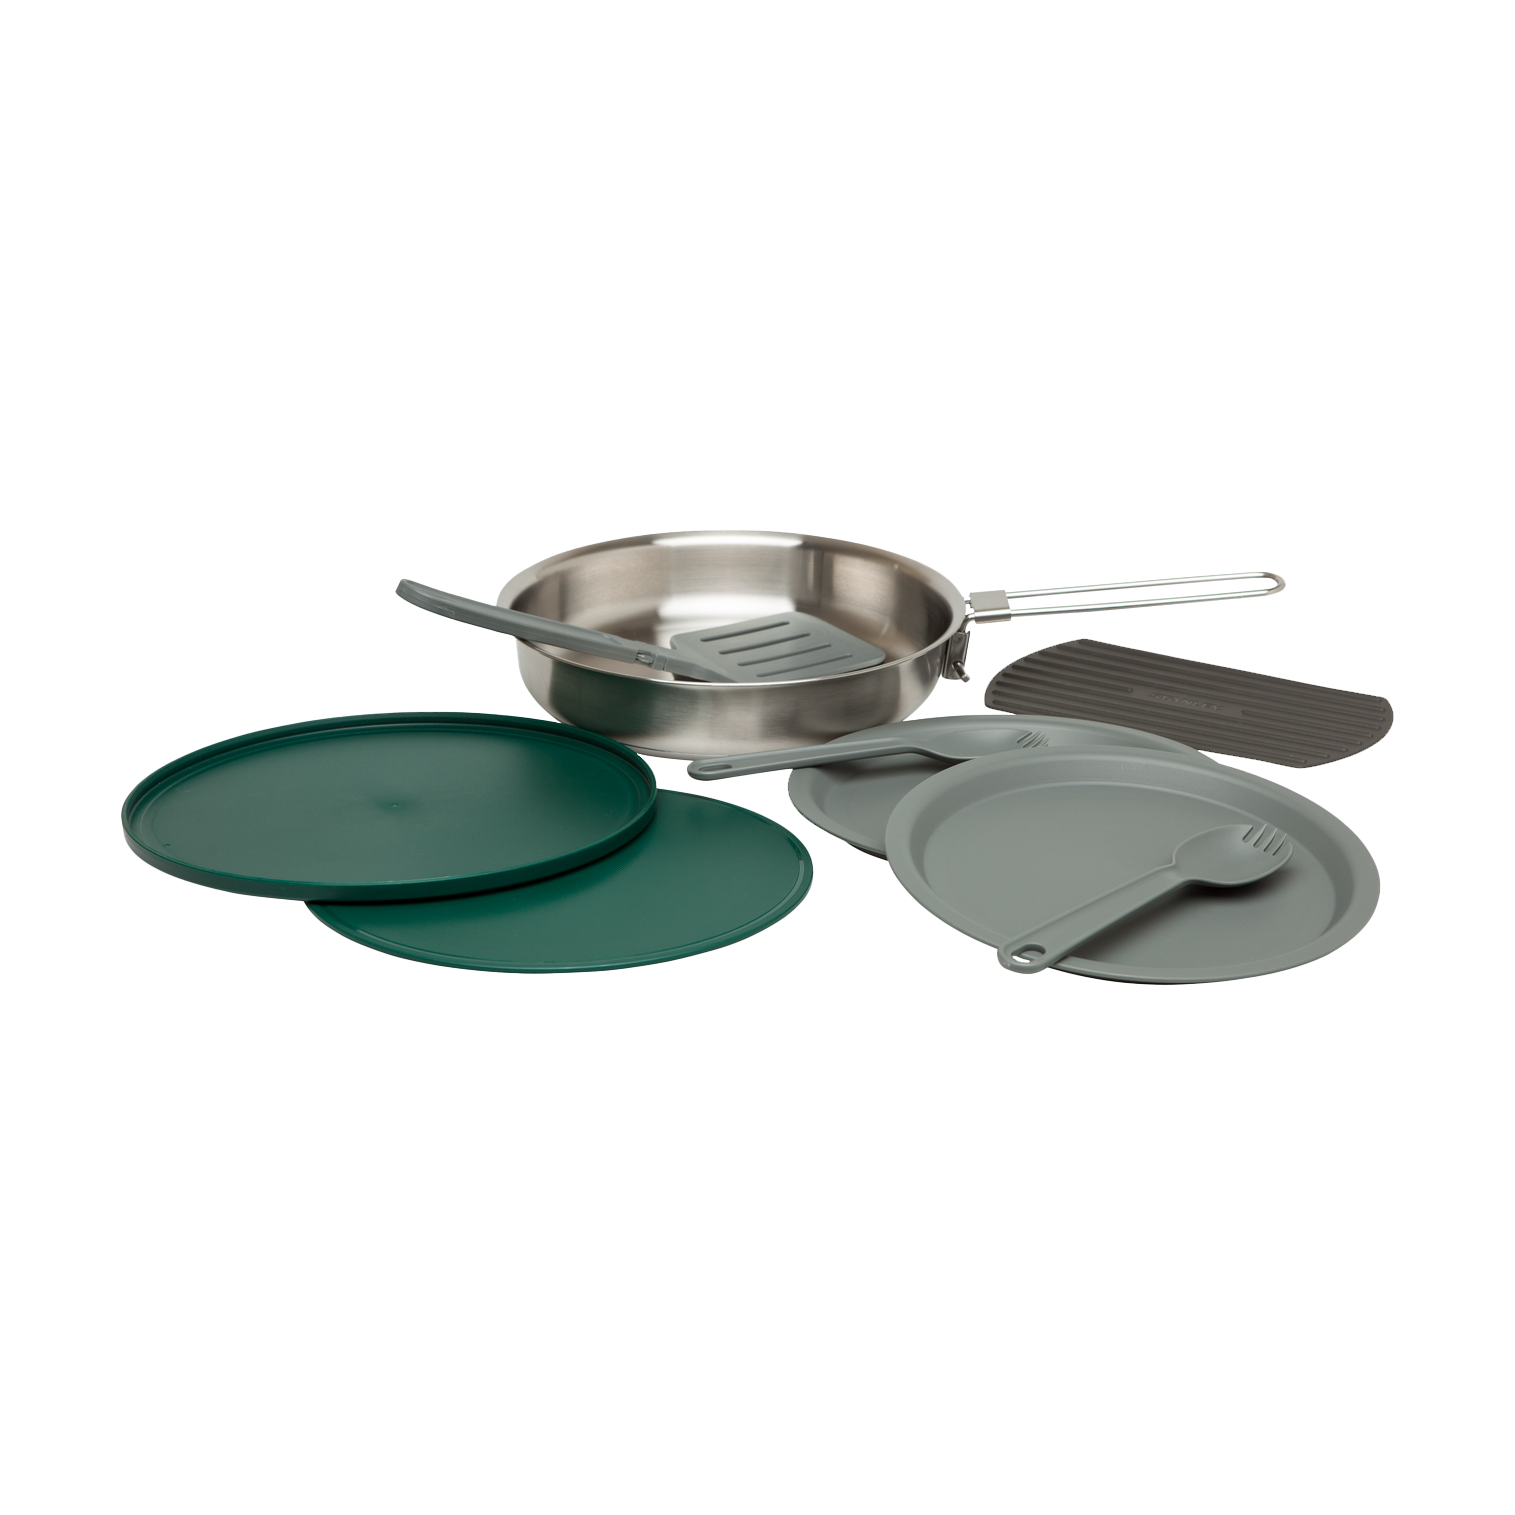 Adventure All-In-One Fry Pan Set: Stainless